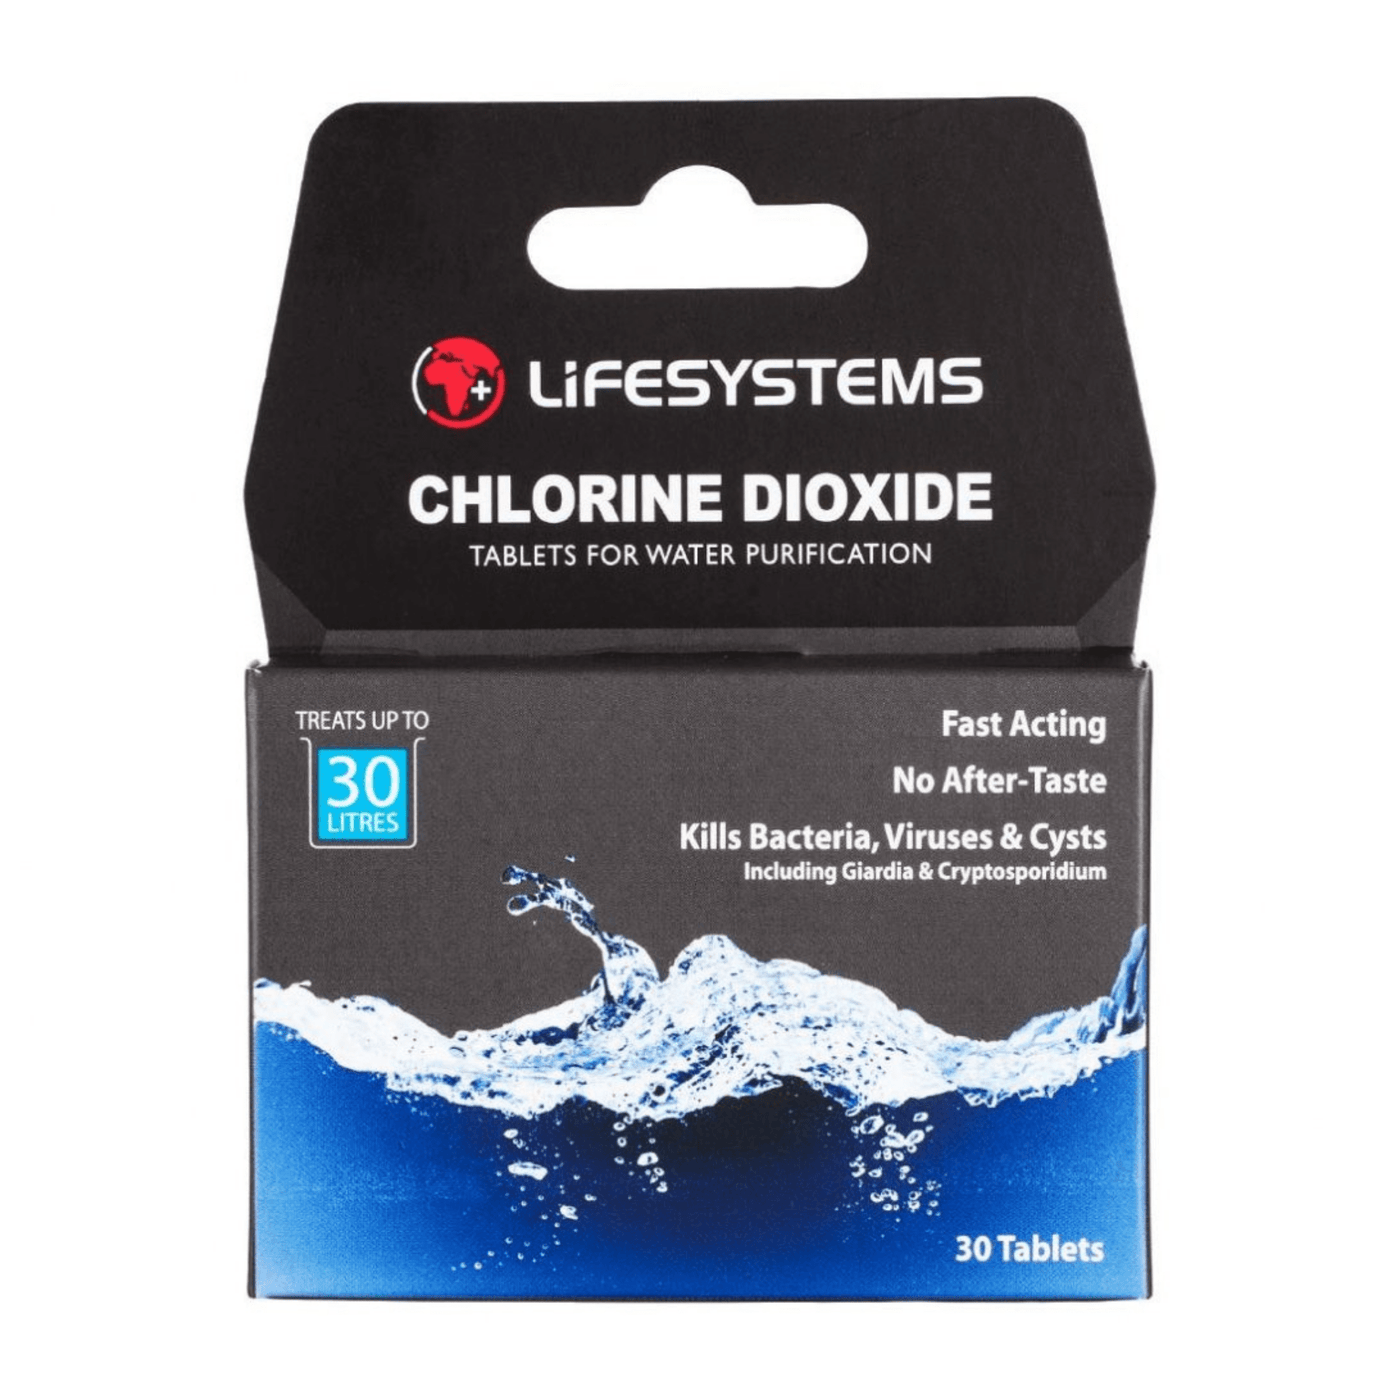 Lifesystems Chlorine Dioxide Tablets | Water Purification | Further Faster Christchurch NZ